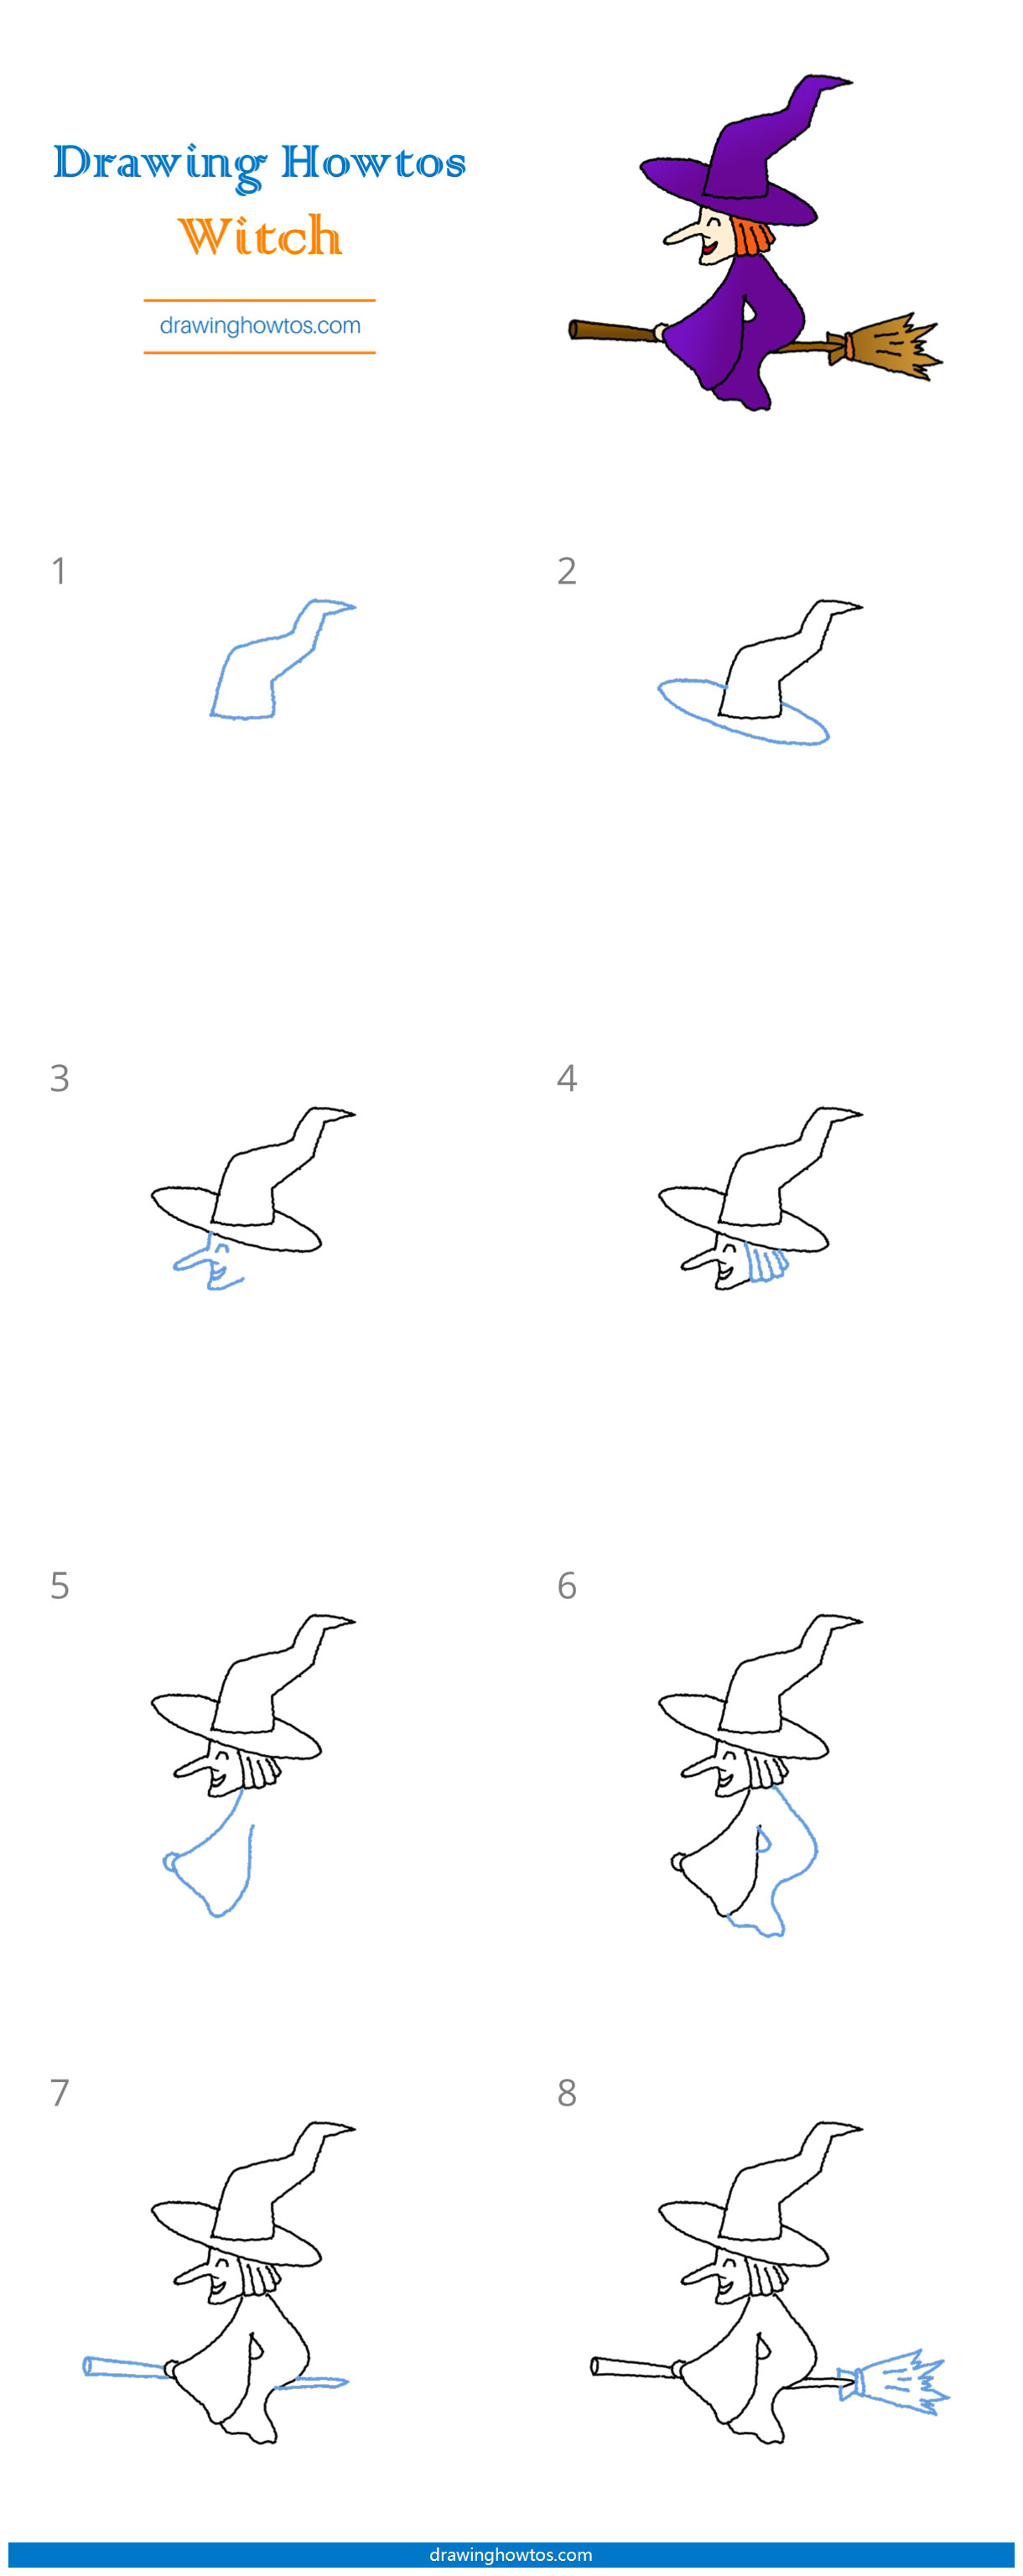 How to Draw a Witch Step by Step